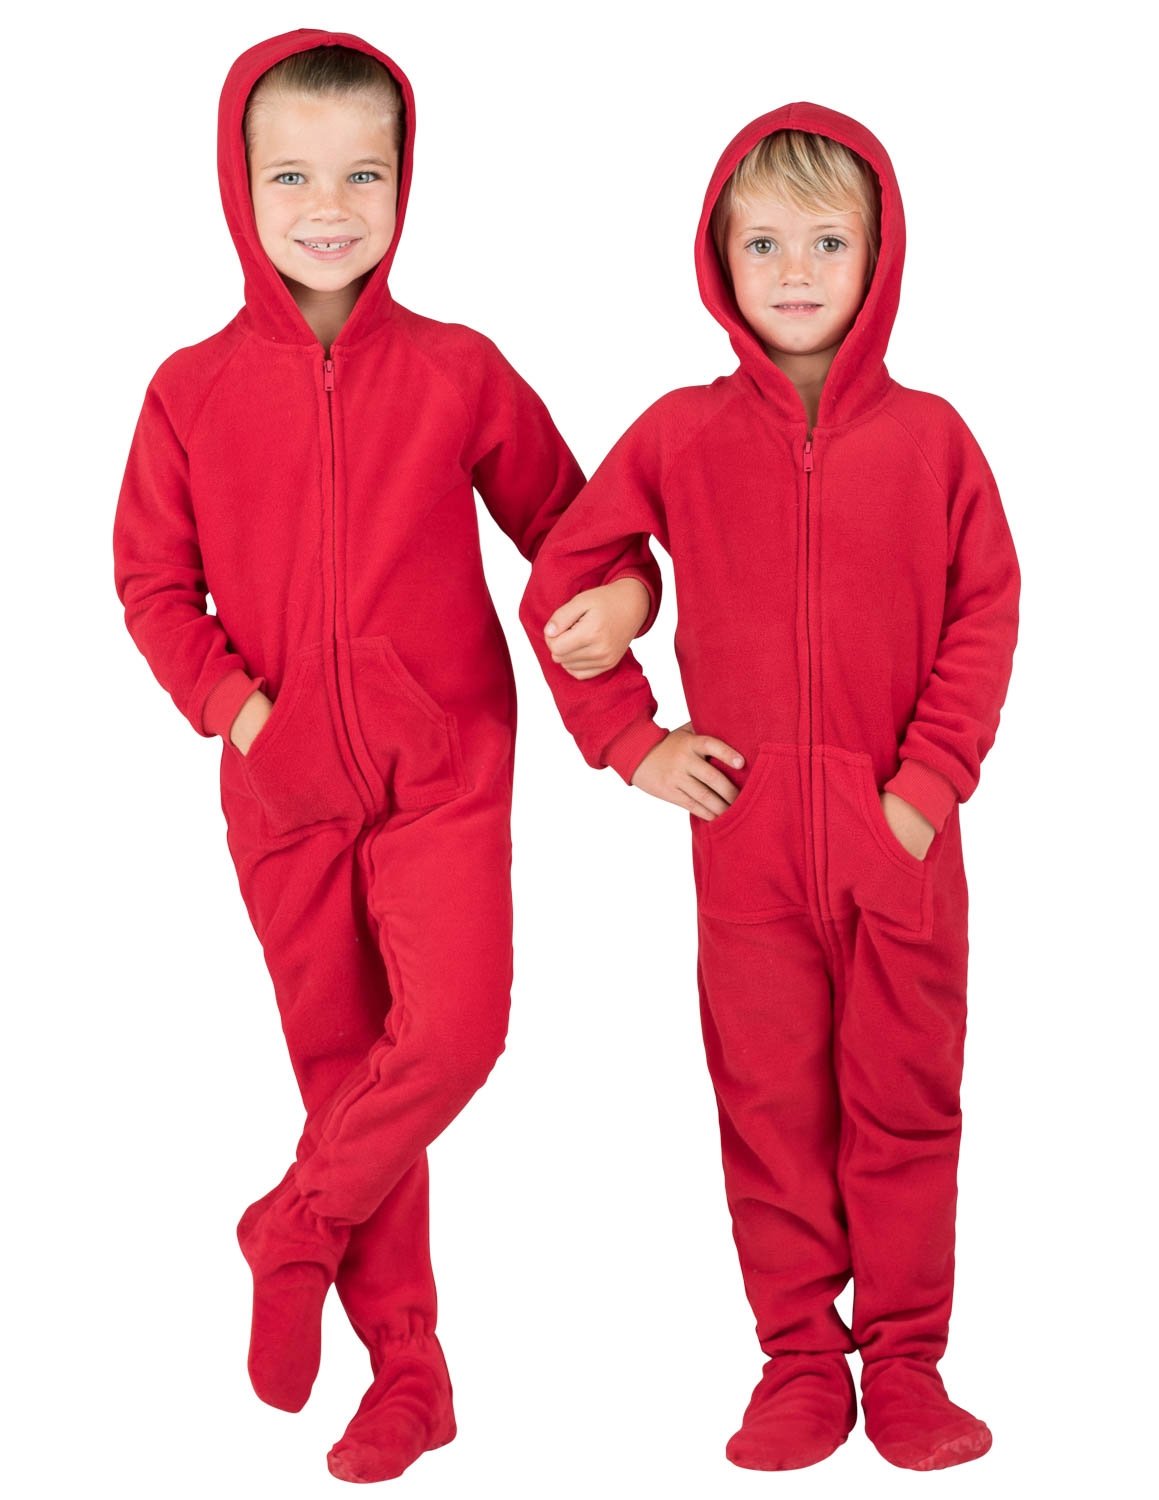 Footed Pajamas - Family Matching Chilli Red Hoodie One Pieces for Boys, Girls, Men, Women and Pets - Adult - Medium Plus/Wide (Fits 5'8 - 5'11") - image 5 of 7